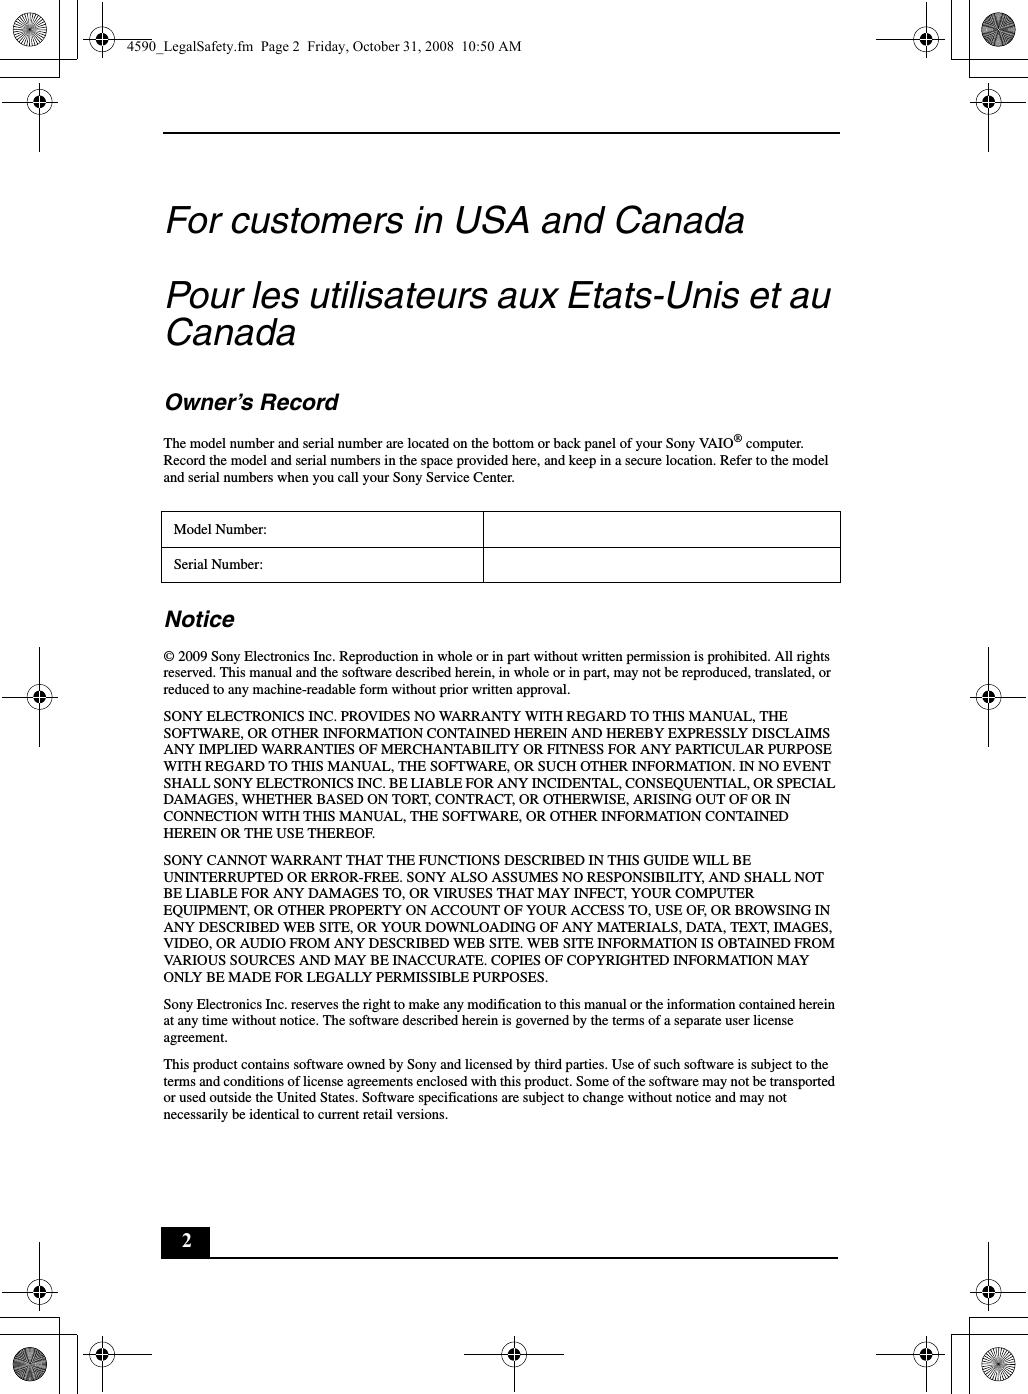 2For customers in USA and CanadaPour les utilisateurs aux Etats-Unis et au CanadaOwner’s RecordThe model number and serial number are located on the bottom or back panel of your Sony VAIO® computer. Record the model and serial numbers in the space provided here, and keep in a secure location. Refer to the model and serial numbers when you call your Sony Service Center.Notice© 2009 Sony Electronics Inc. Reproduction in whole or in part without written permission is prohibited. All rights reserved. This manual and the software described herein, in whole or in part, may not be reproduced, translated, or reduced to any machine-readable form without prior written approval.SONY ELECTRONICS INC. PROVIDES NO WARRANTY WITH REGARD TO THIS MANUAL, THE SOFTWARE, OR OTHER INFORMATION CONTAINED HEREIN AND HEREBY EXPRESSLY DISCLAIMS ANY IMPLIED WARRANTIES OF MERCHANTABILITY OR FITNESS FOR ANY PARTICULAR PURPOSE WITH REGARD TO THIS MANUAL, THE SOFTWARE, OR SUCH OTHER INFORMATION. IN NO EVENT SHALL SONY ELECTRONICS INC. BE LIABLE FOR ANY INCIDENTAL, CONSEQUENTIAL, OR SPECIAL DAMAGES, WHETHER BASED ON TORT, CONTRACT, OR OTHERWISE, ARISING OUT OF OR IN CONNECTION WITH THIS MANUAL, THE SOFTWARE, OR OTHER INFORMATION CONTAINED HEREIN OR THE USE THEREOF.SONY CANNOT WARRANT THAT THE FUNCTIONS DESCRIBED IN THIS GUIDE WILL BE UNINTERRUPTED OR ERROR-FREE. SONY ALSO ASSUMES NO RESPONSIBILITY, AND SHALL NOT BE LIABLE FOR ANY DAMAGES TO, OR VIRUSES THAT MAY INFECT, YOUR COMPUTER EQUIPMENT, OR OTHER PROPERTY ON ACCOUNT OF YOUR ACCESS TO, USE OF, OR BROWSING IN ANY DESCRIBED WEB SITE, OR YOUR DOWNLOADING OF ANY MATERIALS, DATA, TEXT, IMAGES, VIDEO, OR AUDIO FROM ANY DESCRIBED WEB SITE. WEB SITE INFORMATION IS OBTAINED FROM VARIOUS SOURCES AND MAY BE INACCURATE. COPIES OF COPYRIGHTED INFORMATION MAY ONLY BE MADE FOR LEGALLY PERMISSIBLE PURPOSES.Sony Electronics Inc. reserves the right to make any modification to this manual or the information contained herein at any time without notice. The software described herein is governed by the terms of a separate user license agreement.This product contains software owned by Sony and licensed by third parties. Use of such software is subject to the terms and conditions of license agreements enclosed with this product. Some of the software may not be transported or used outside the United States. Software specifications are subject to change without notice and may not necessarily be identical to current retail versions.Model Number:Serial Number:4590_LegalSafety.fm  Page 2  Friday, October 31, 2008  10:50 AM